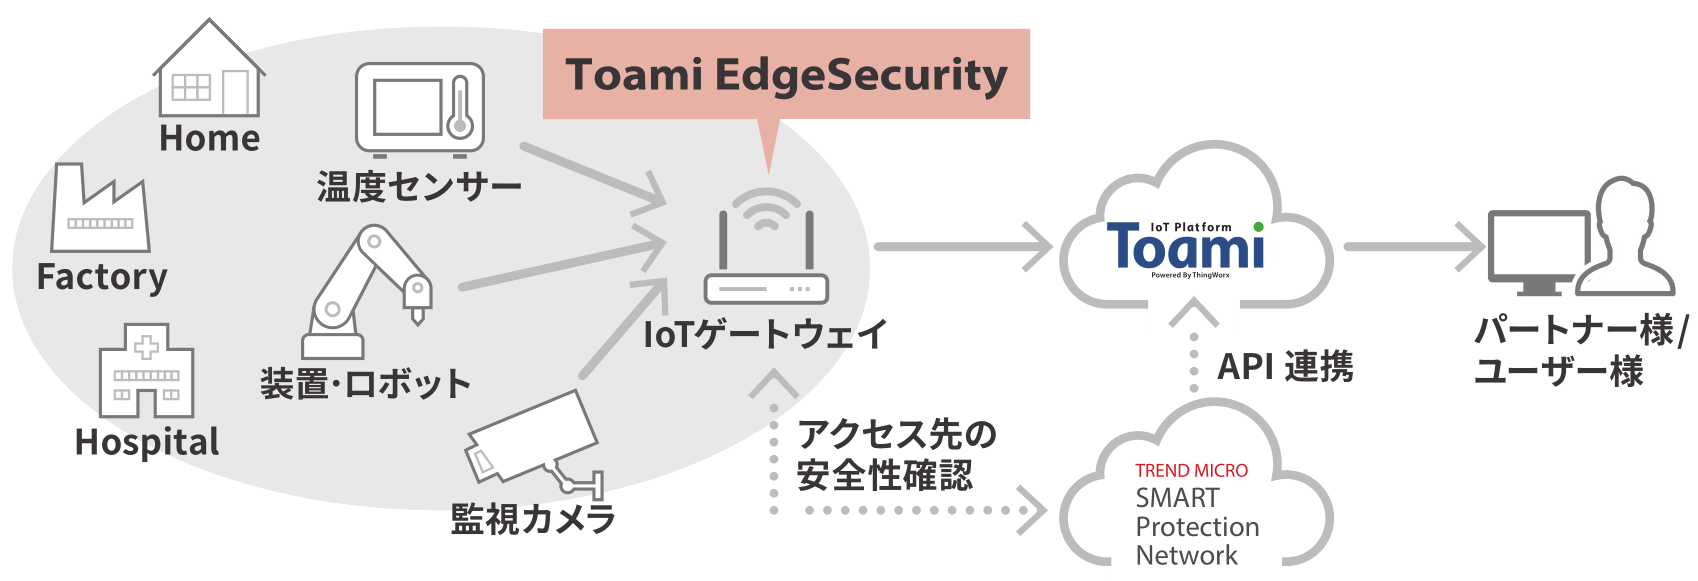 20190408_ToamiEdgeSecurity.png